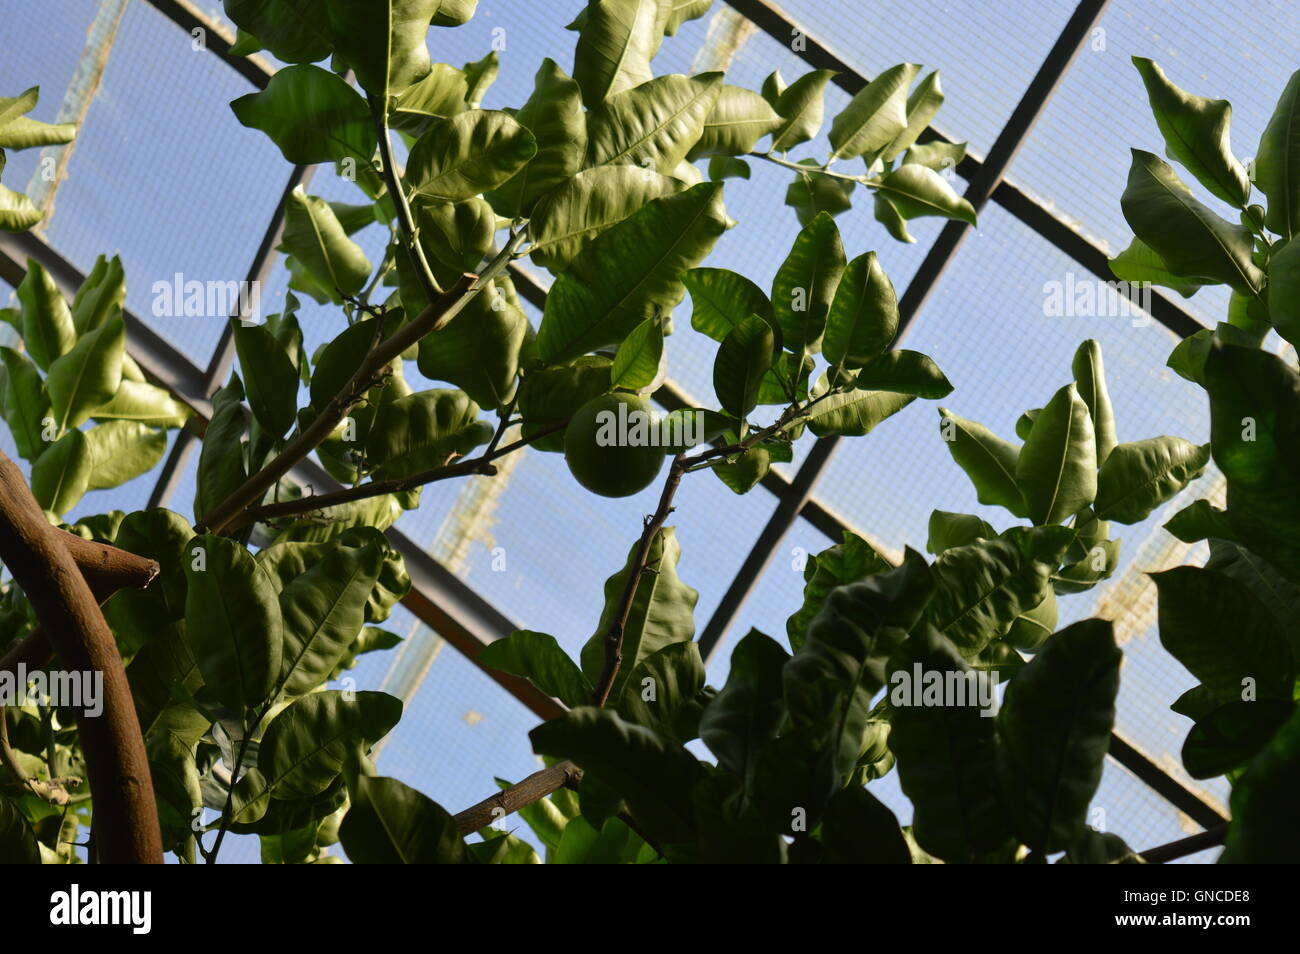 Lemon trees in a greenhouse Stock Photo